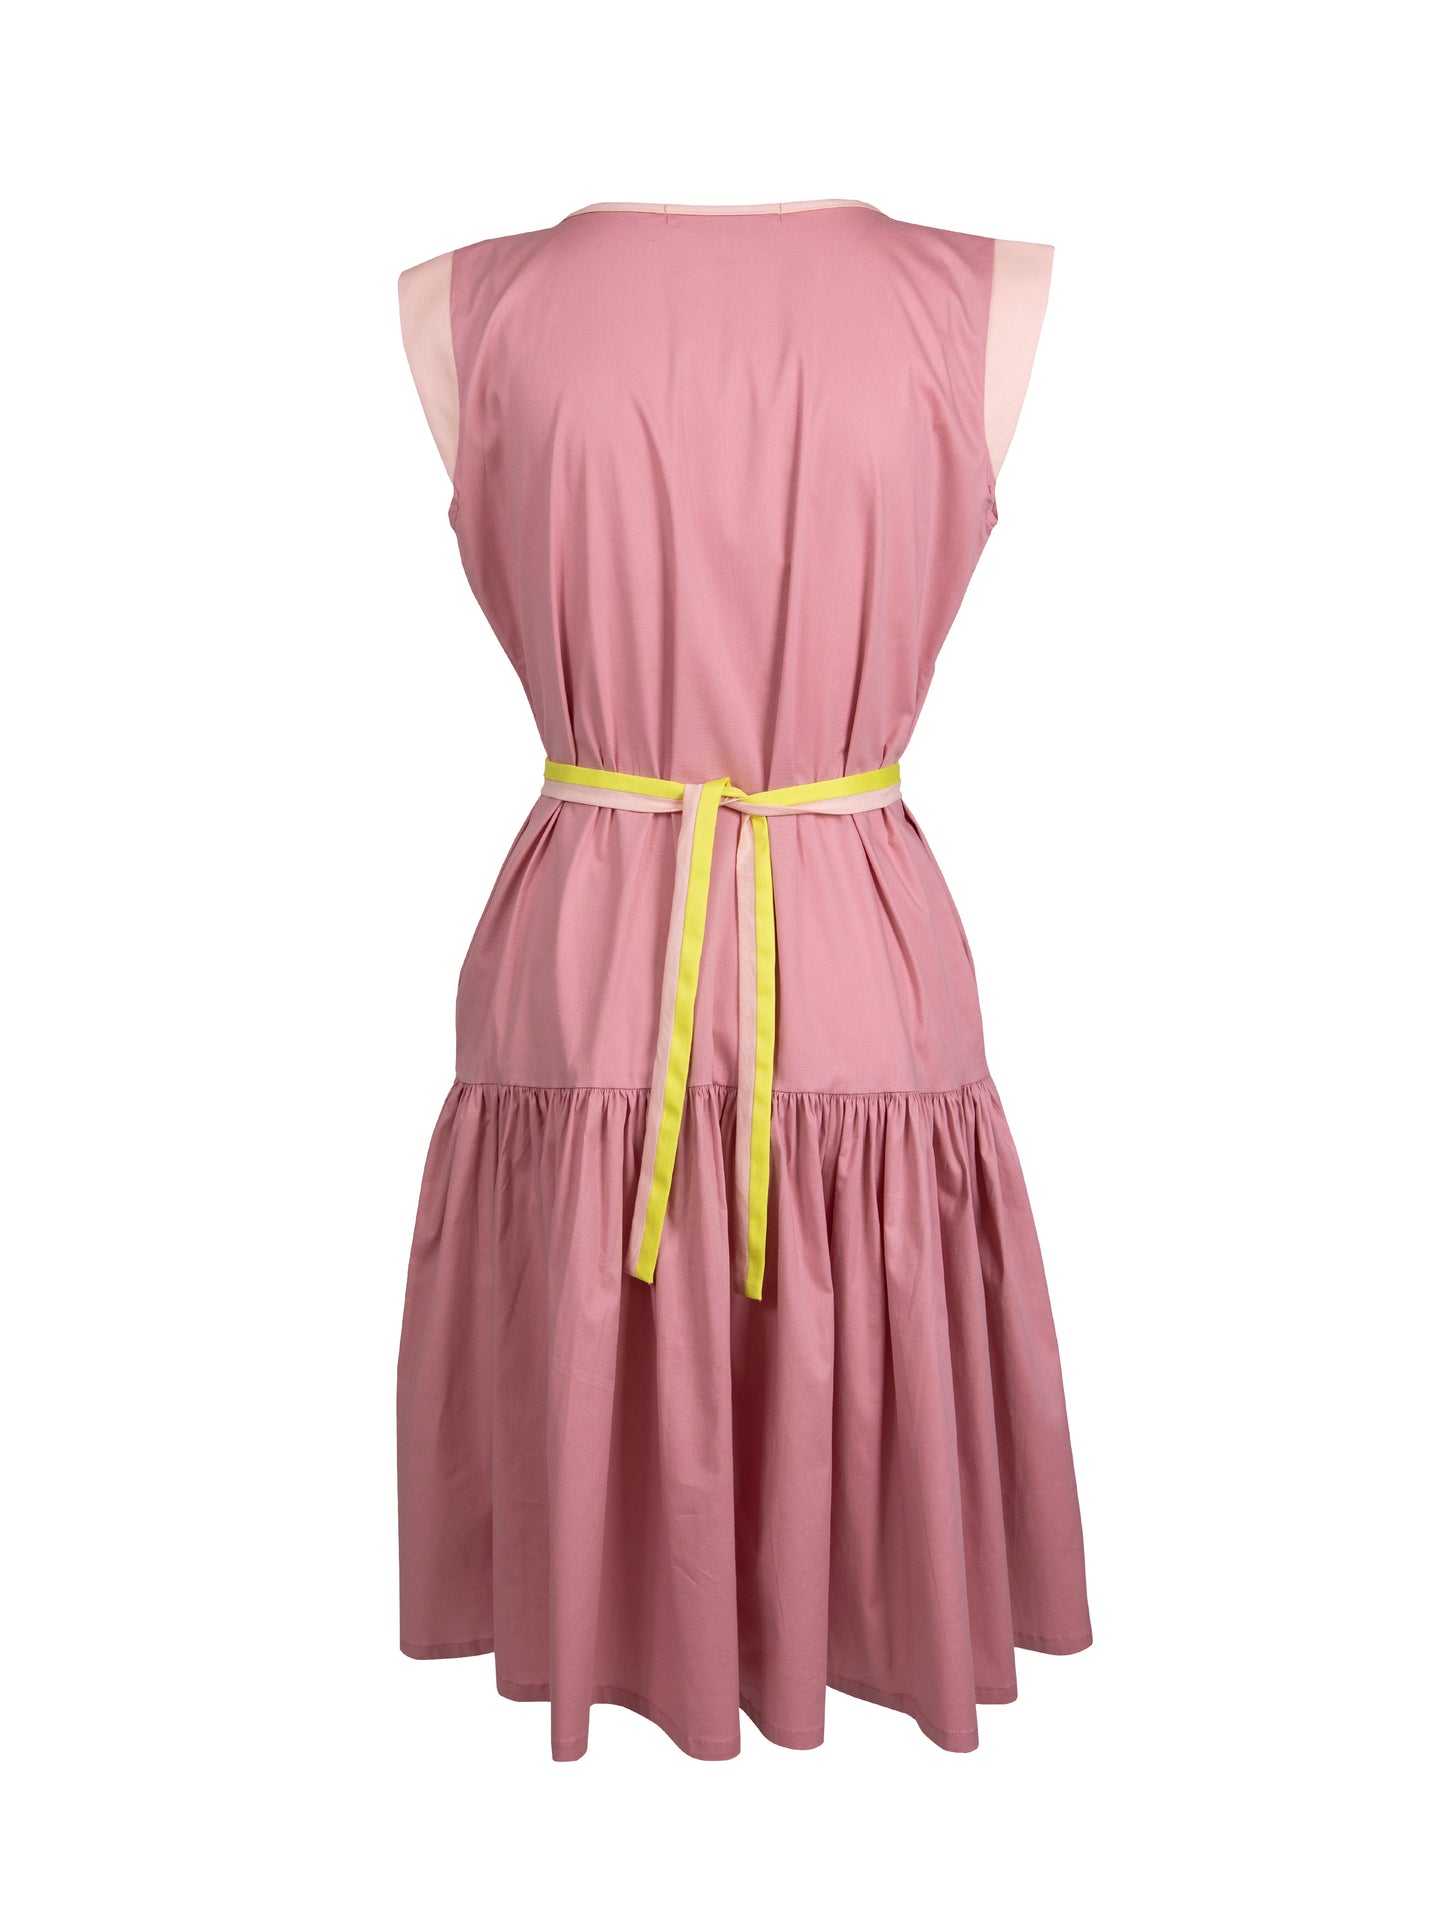 GUILLOTINE Dusty Pink Frill Dress